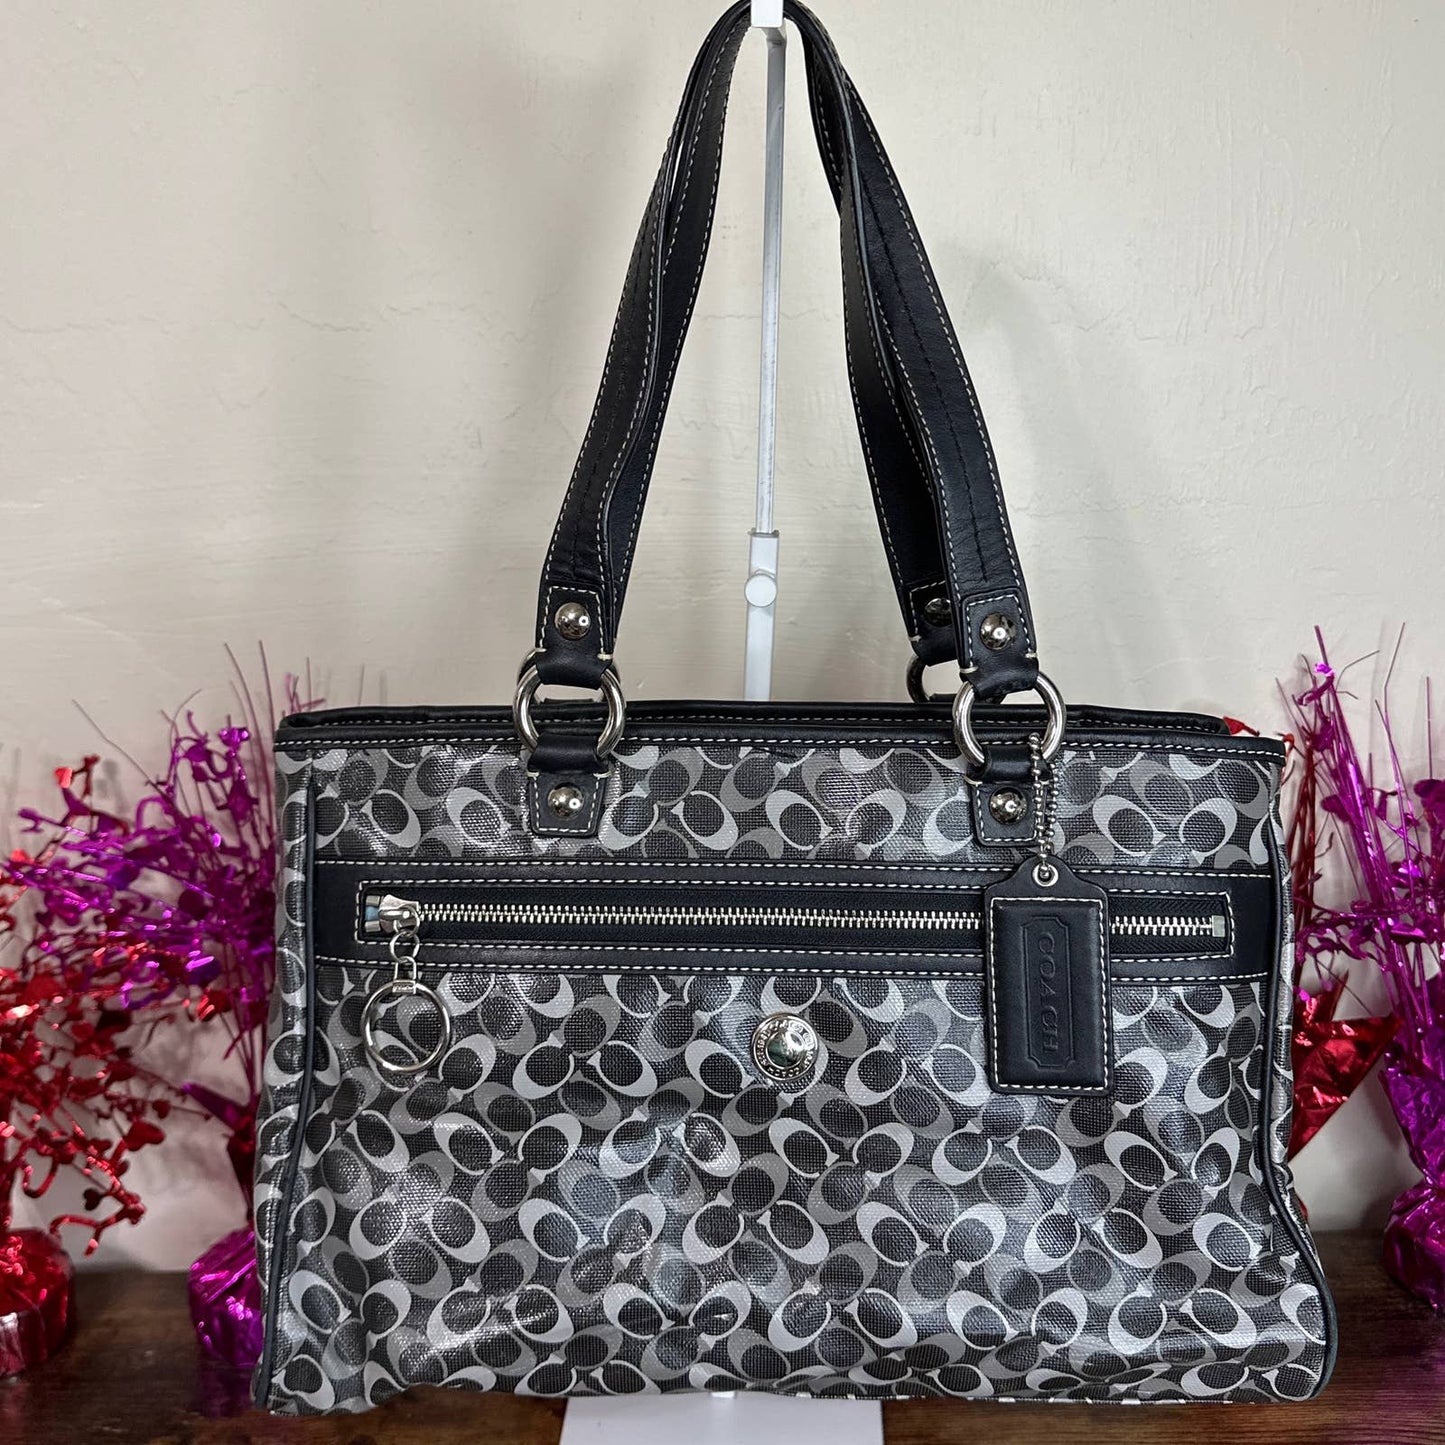 COACH Chelsea Black and Gray Signature Coated Canvas Tote Shoulder Bag